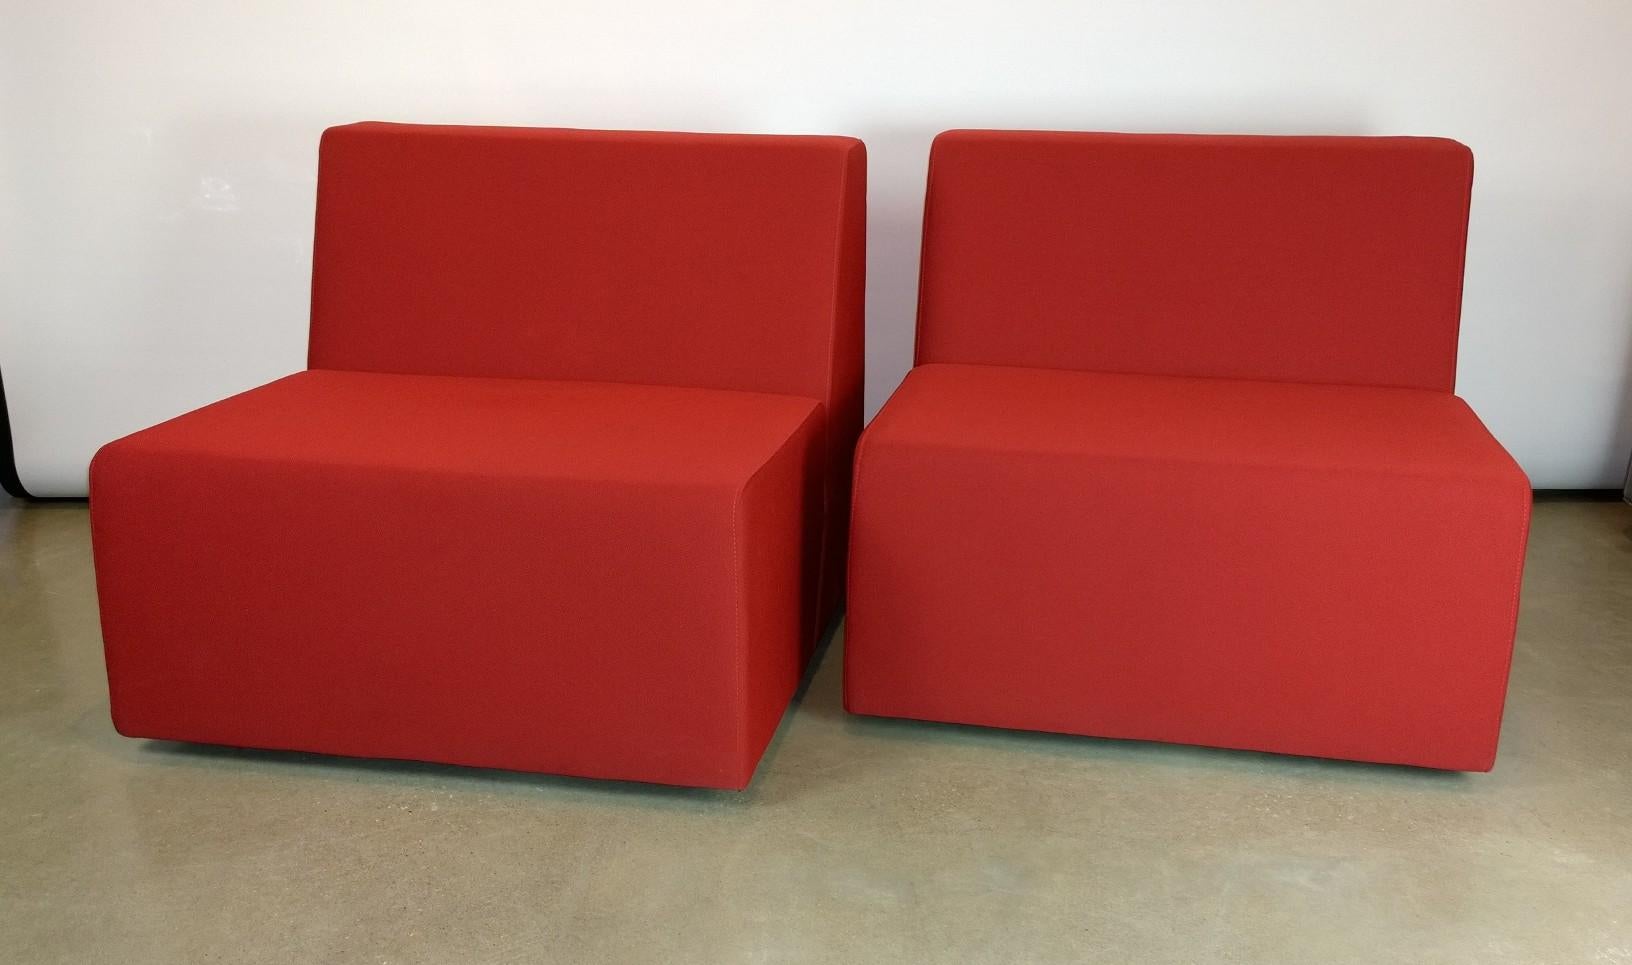 Offered is a signed pair of late 20th century / postmodern turnstone for Steelcase 